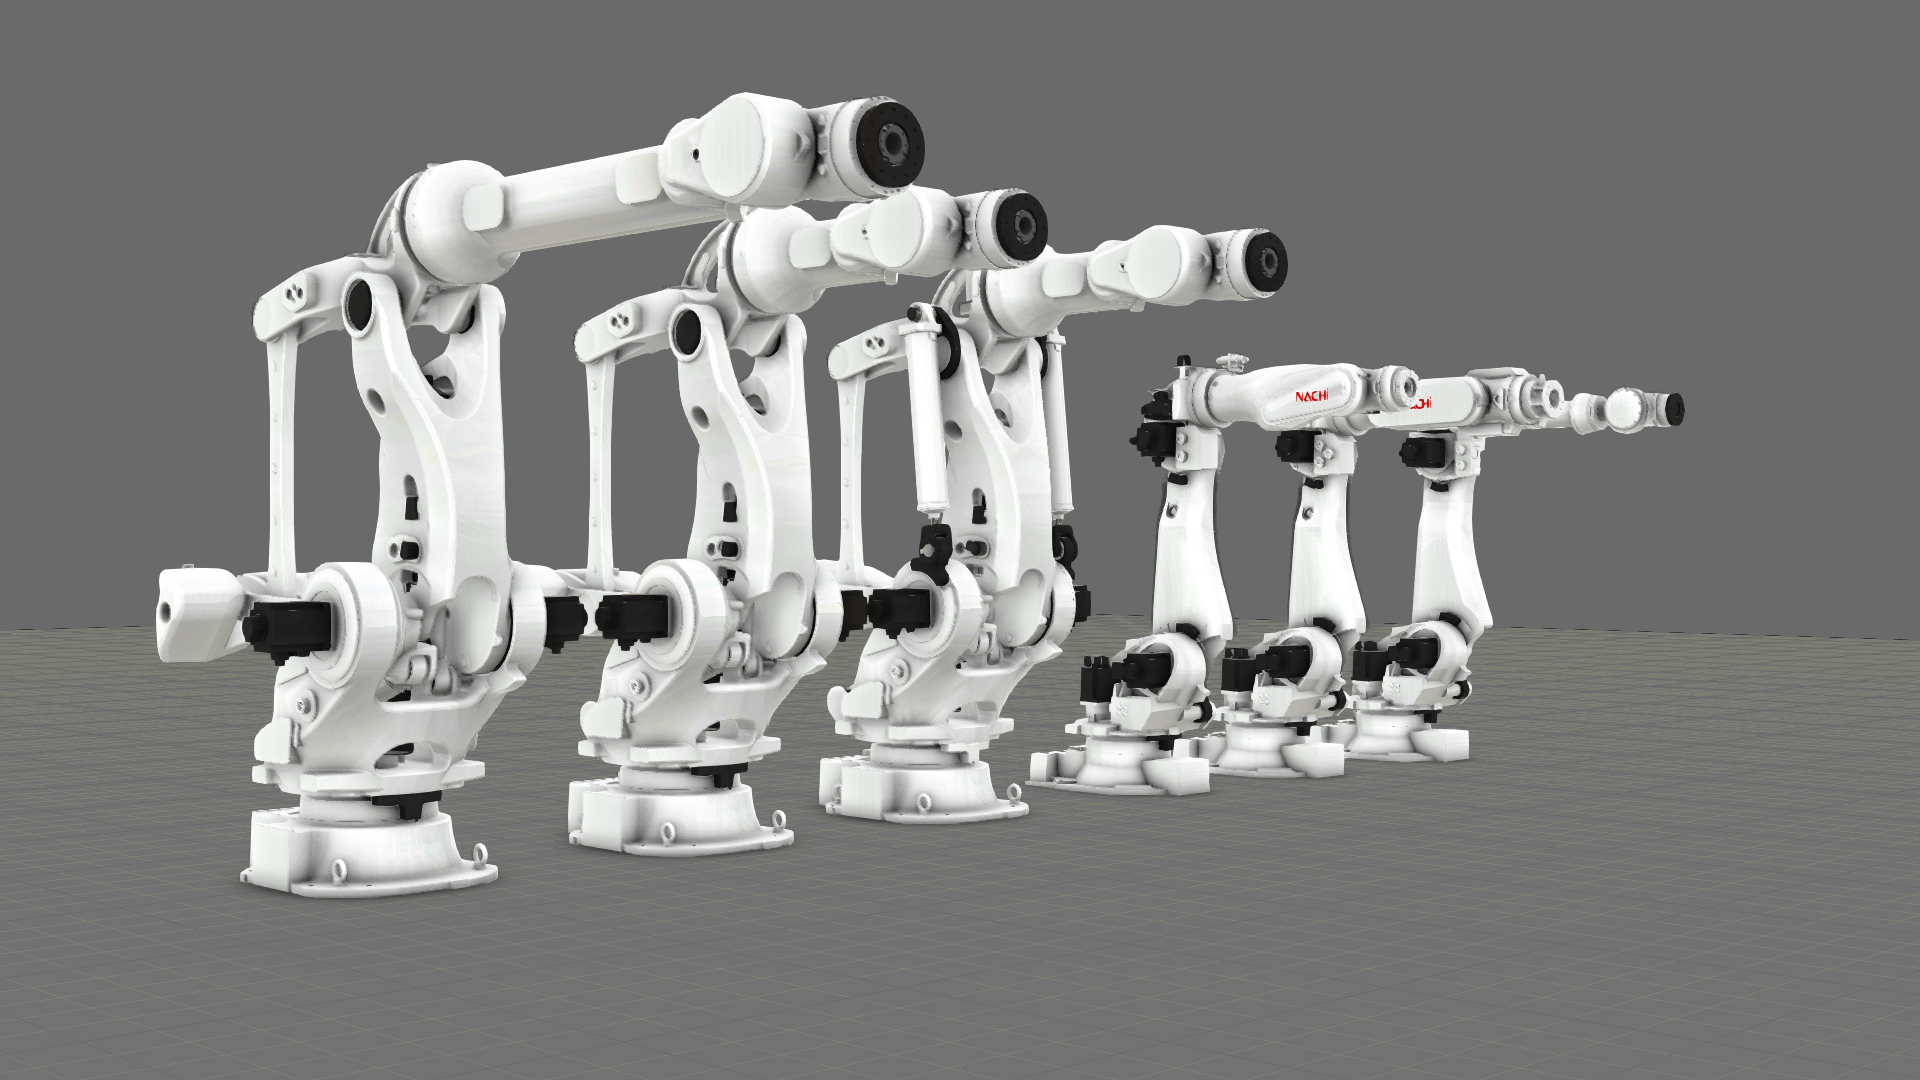 Collection of new Nachi robots in eCatalog